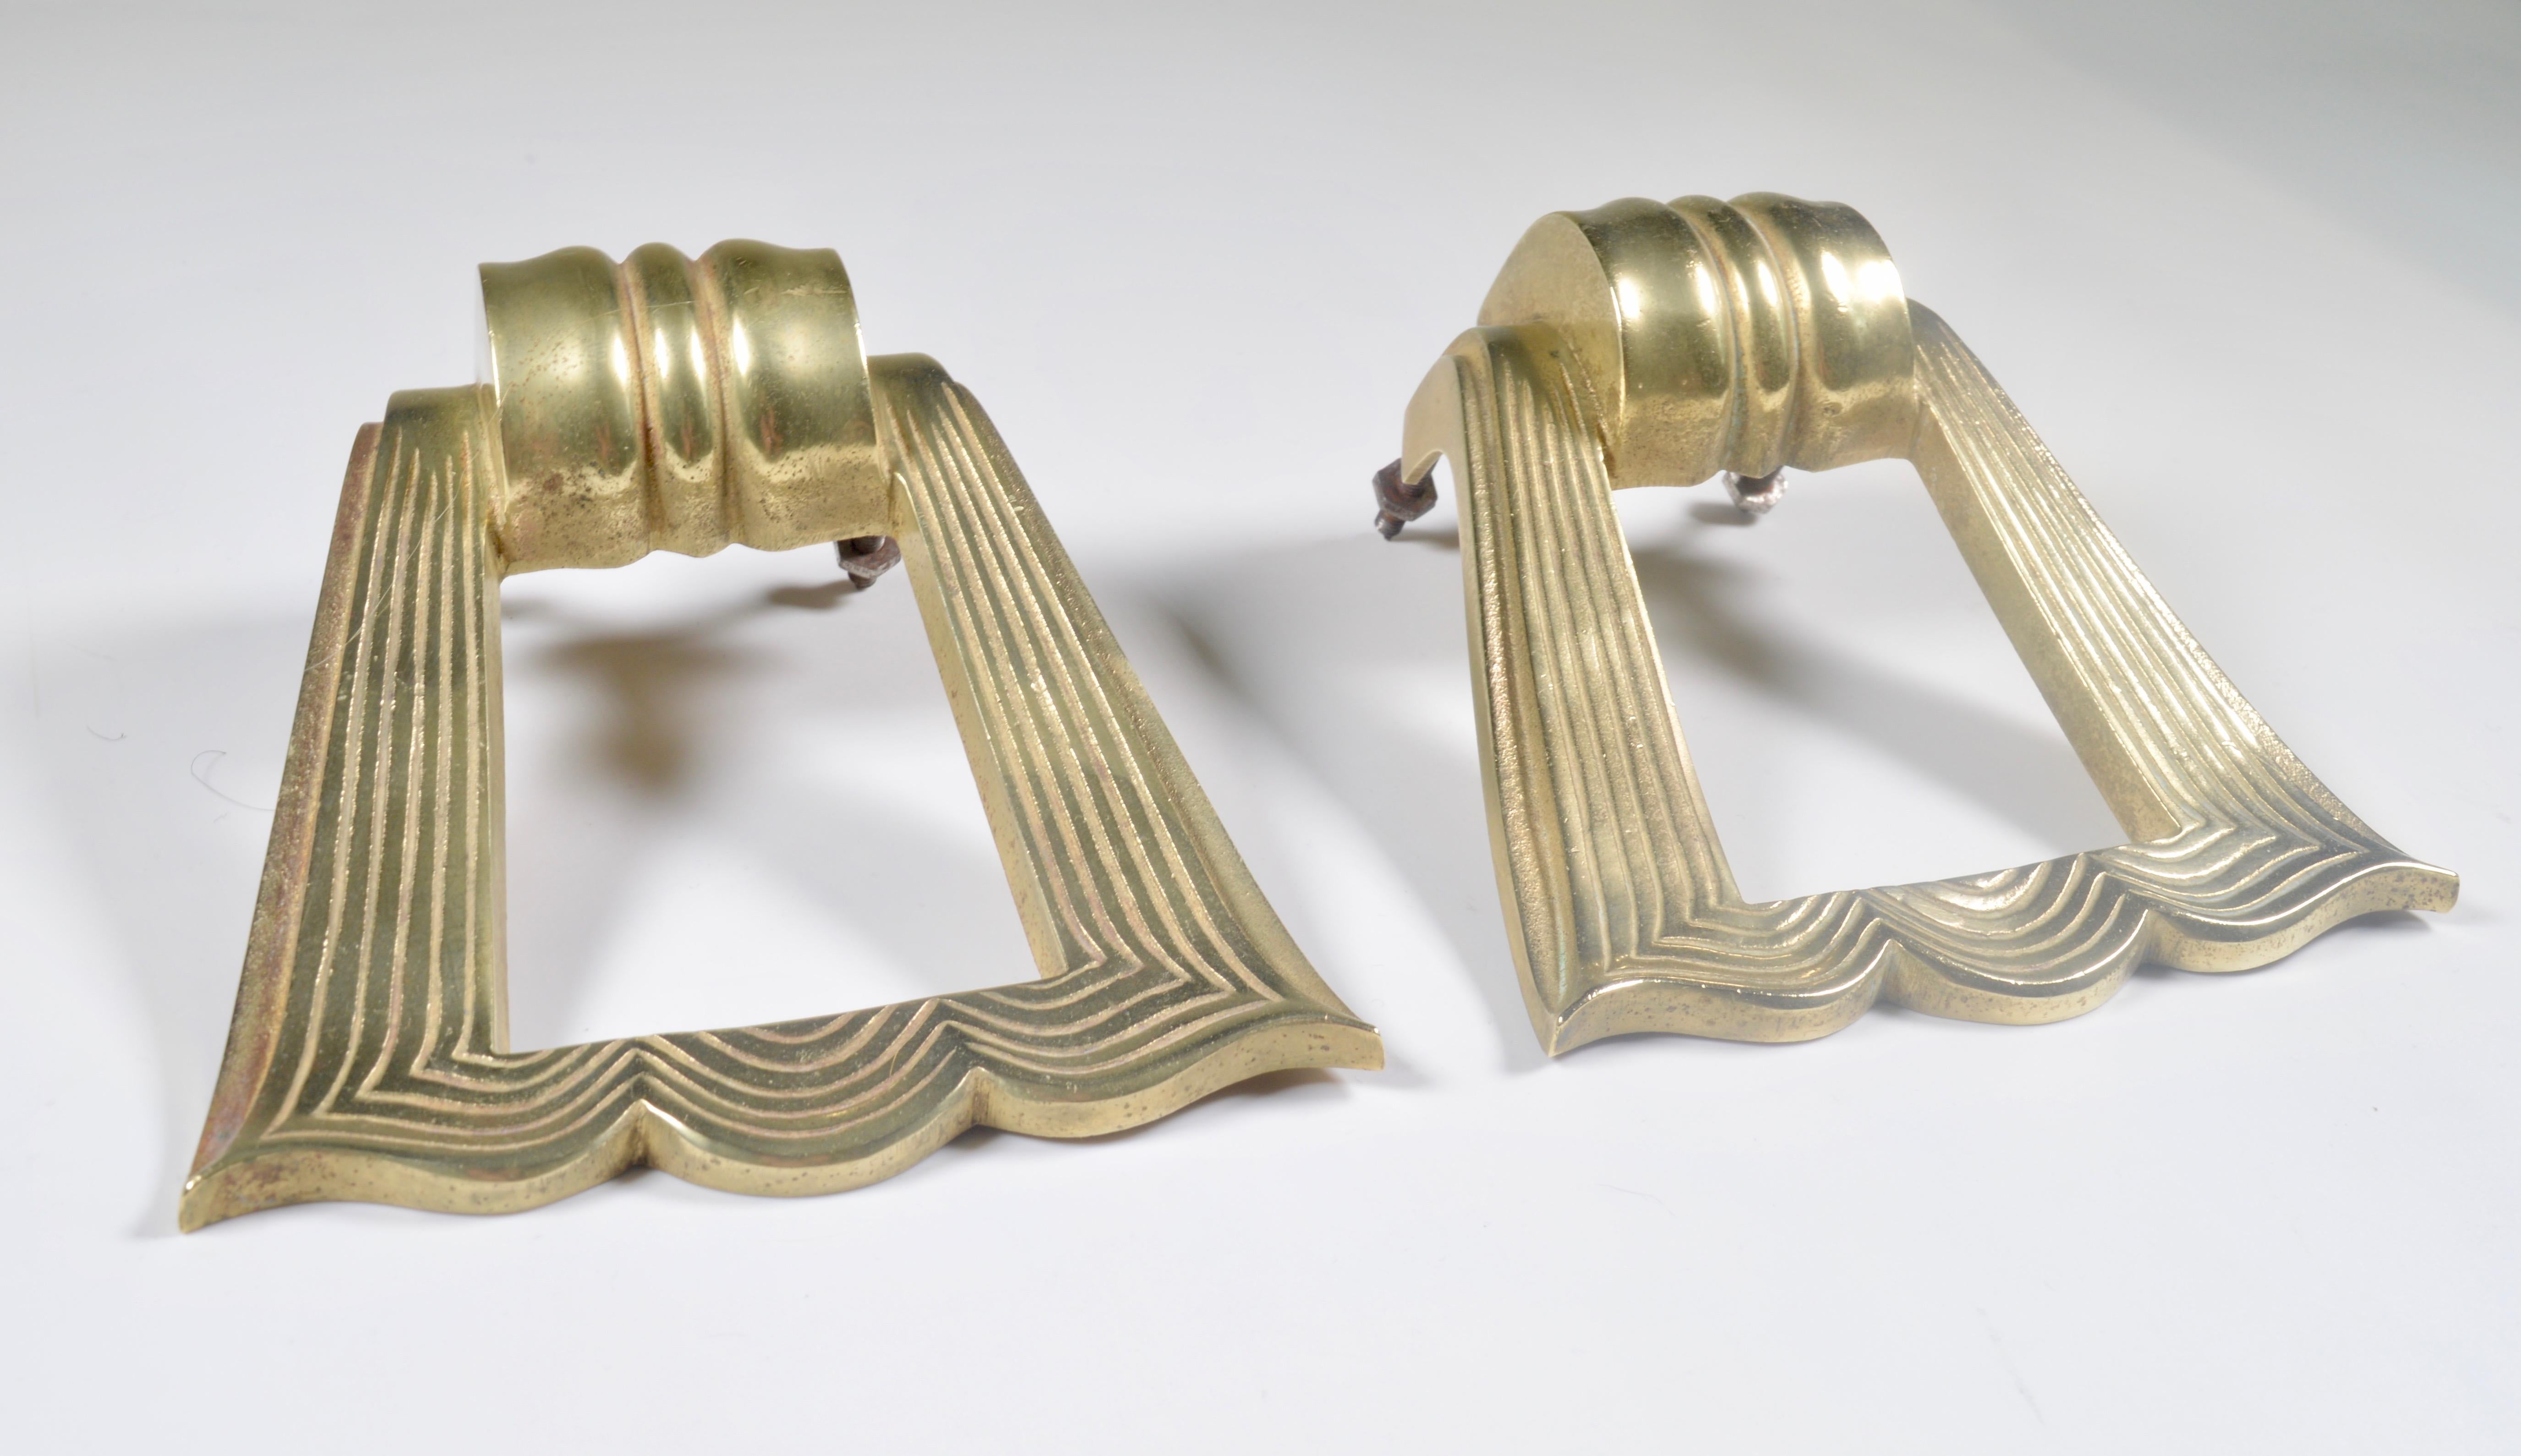 Very elegant large door pulls dating from the 1940s. They can be used on a front door or on interior doors.